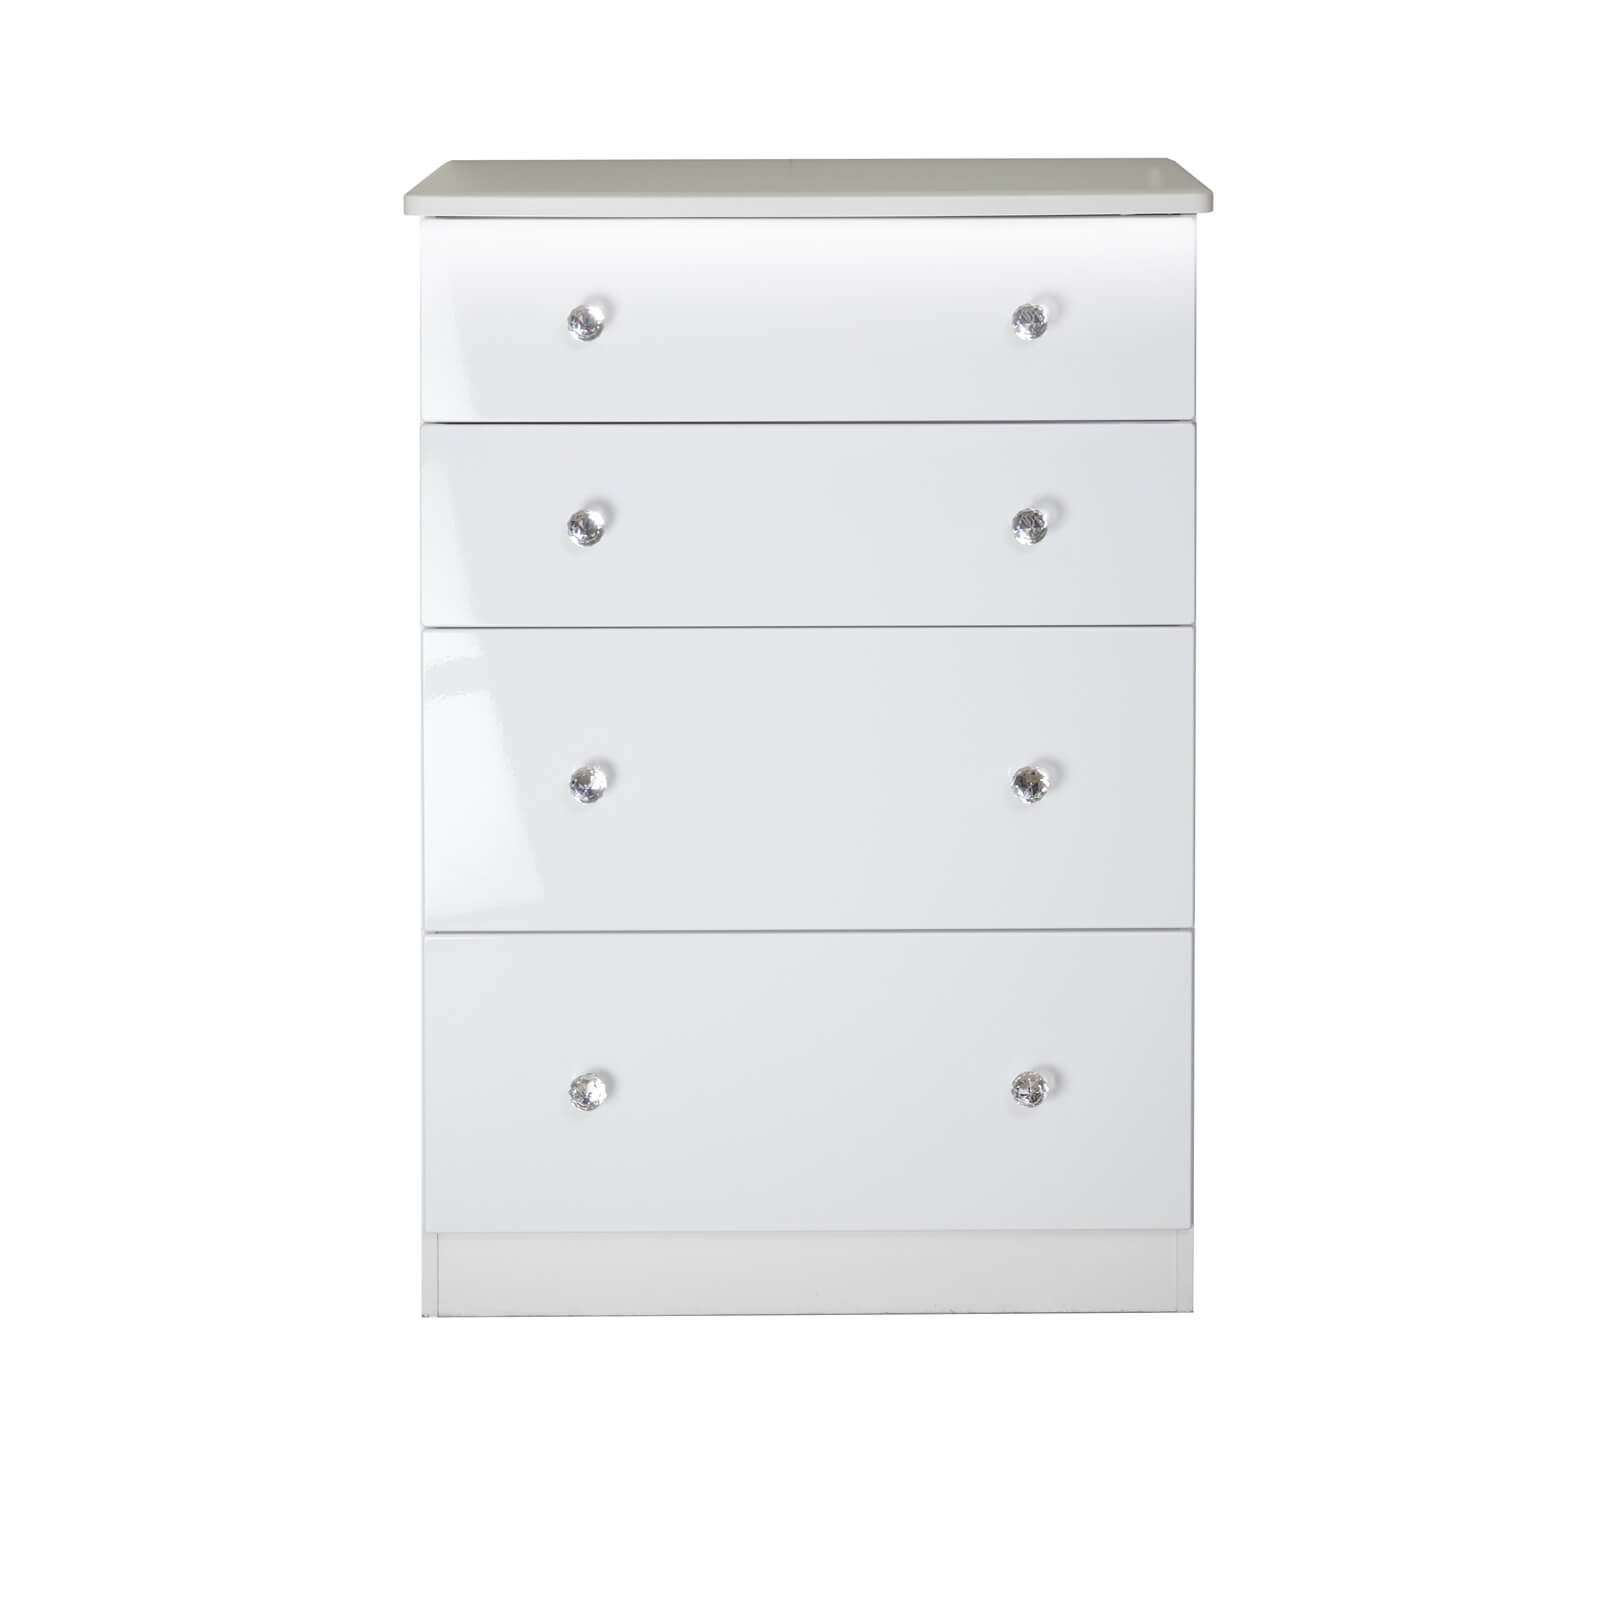 Lumo 4 Drawer Deep Chest with LED Lighting - White